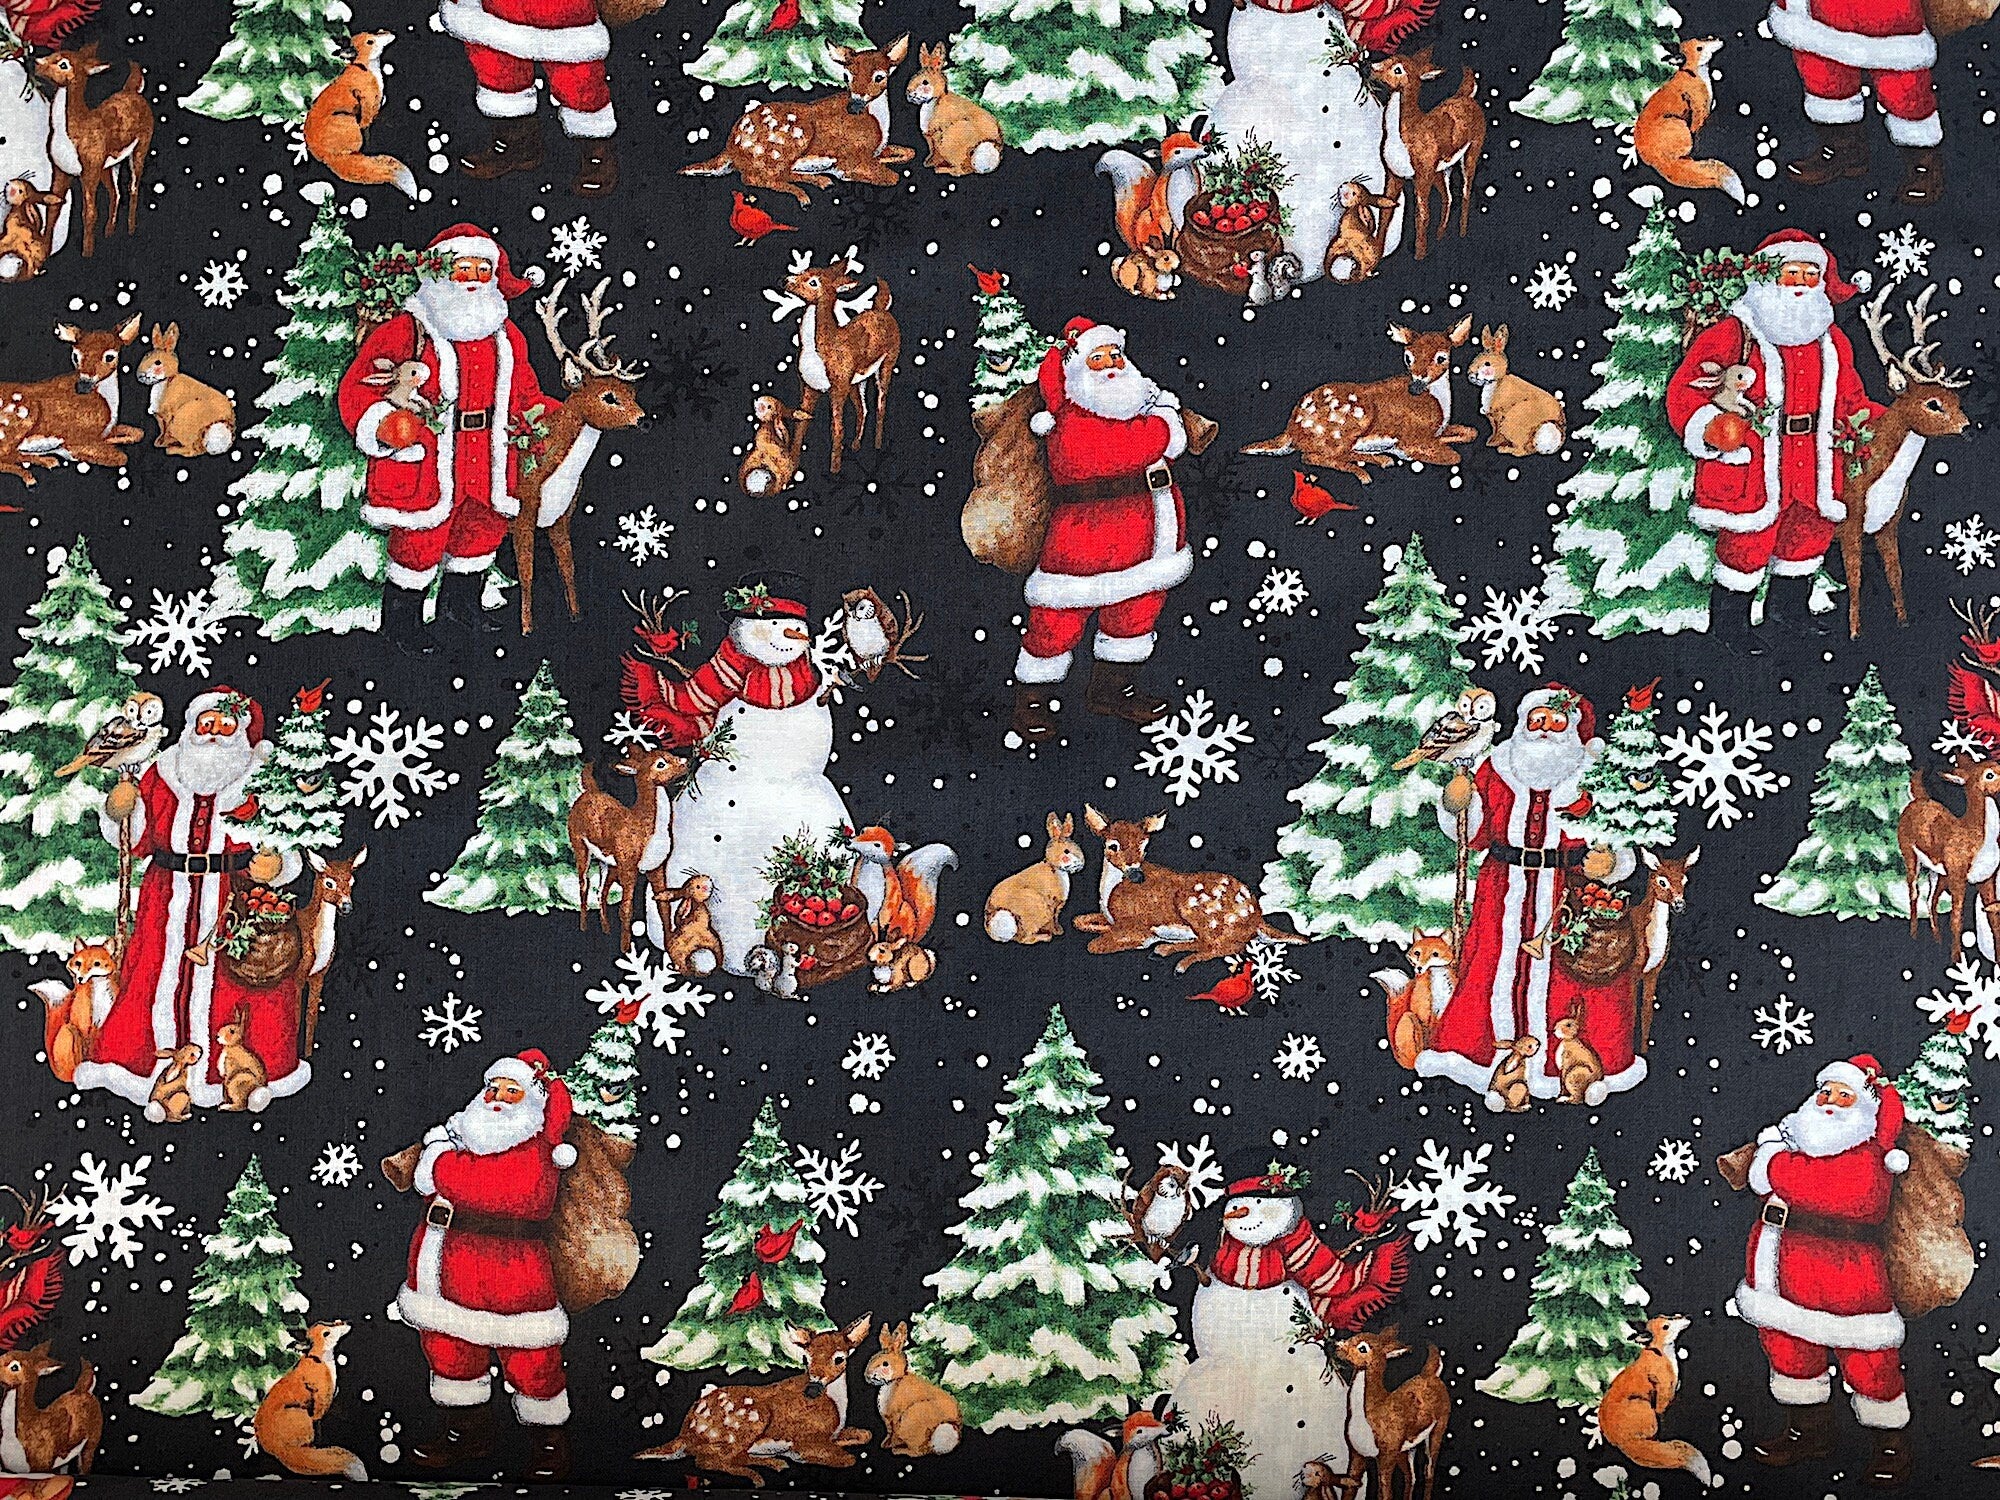 Black cotton fabric covered with Snowmen and Santa's and trees.